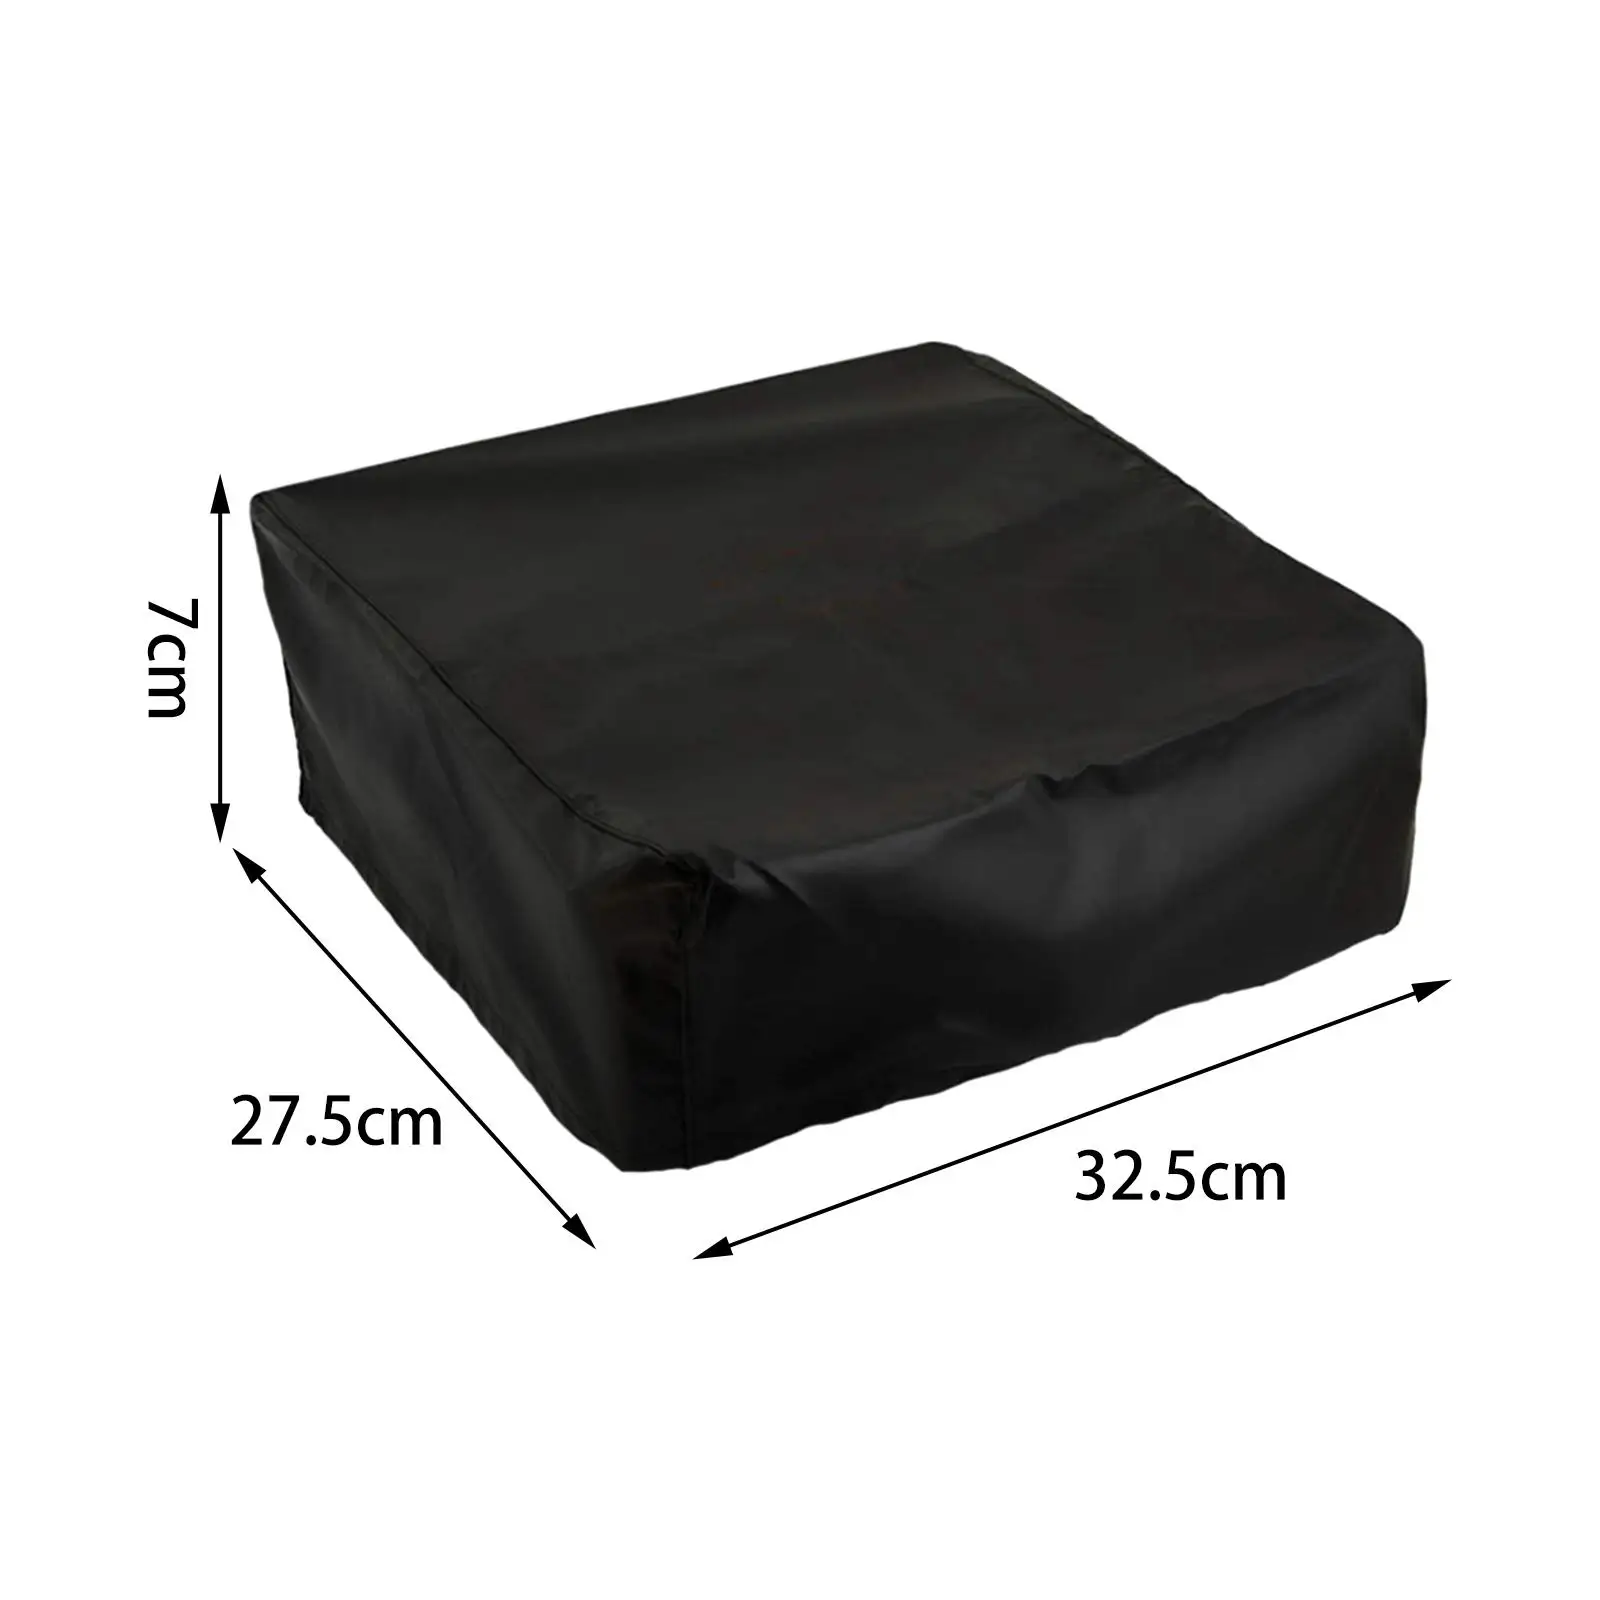 Grill Cover Drawstring Design Outdoor Use Dustproof Durable Water Resistant Bbq Grills Protector Griddle Cover for Kitchen Home